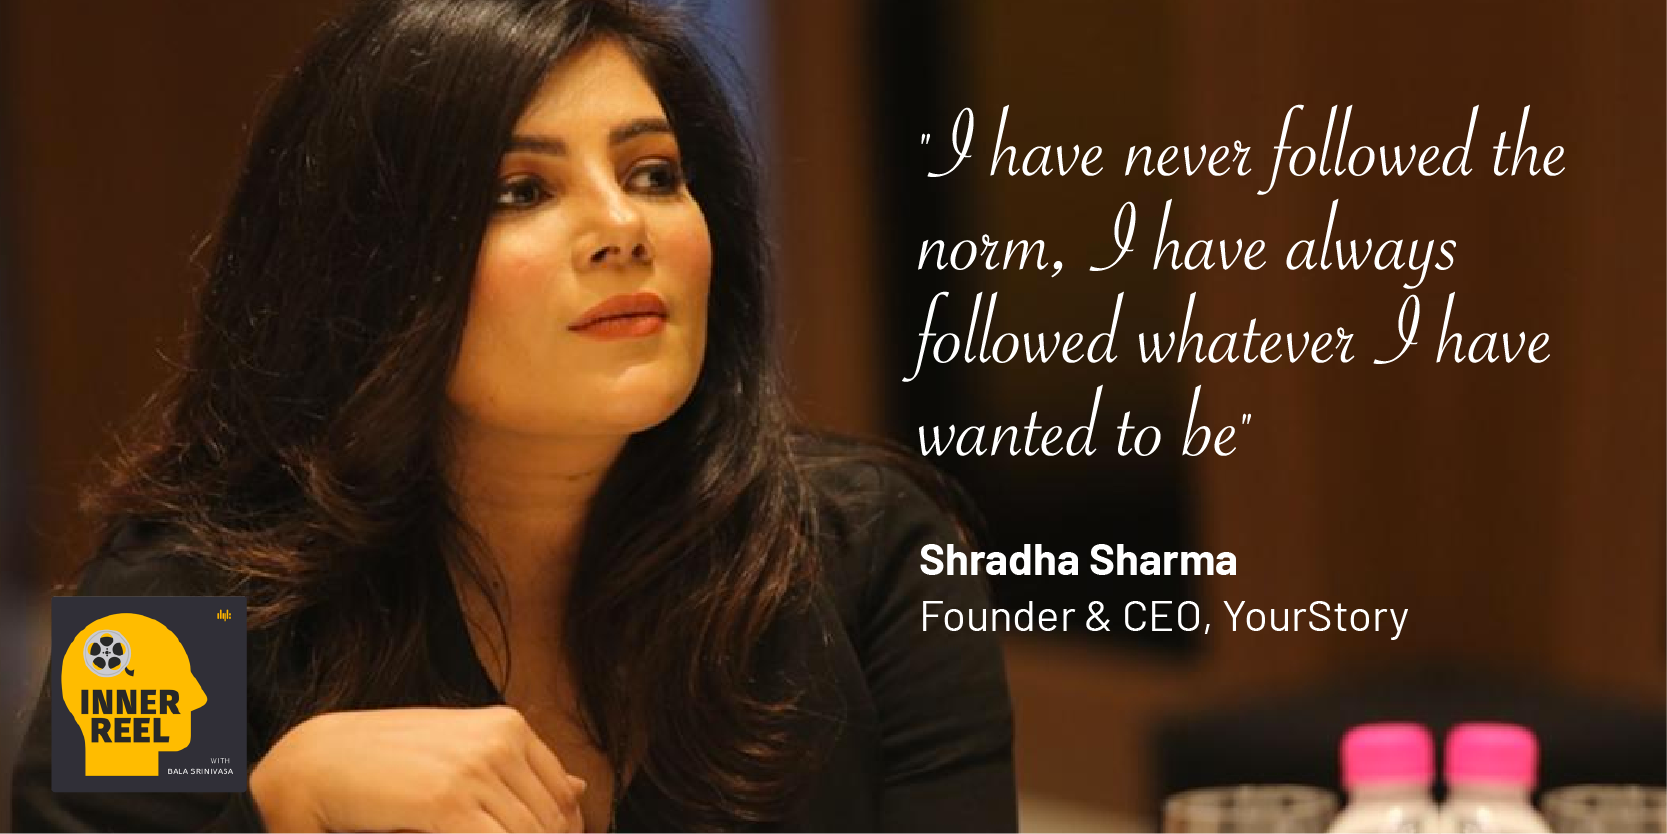 Shradha Sharma: On dealing with bias, being herself, and succeeding as an entrepreneur